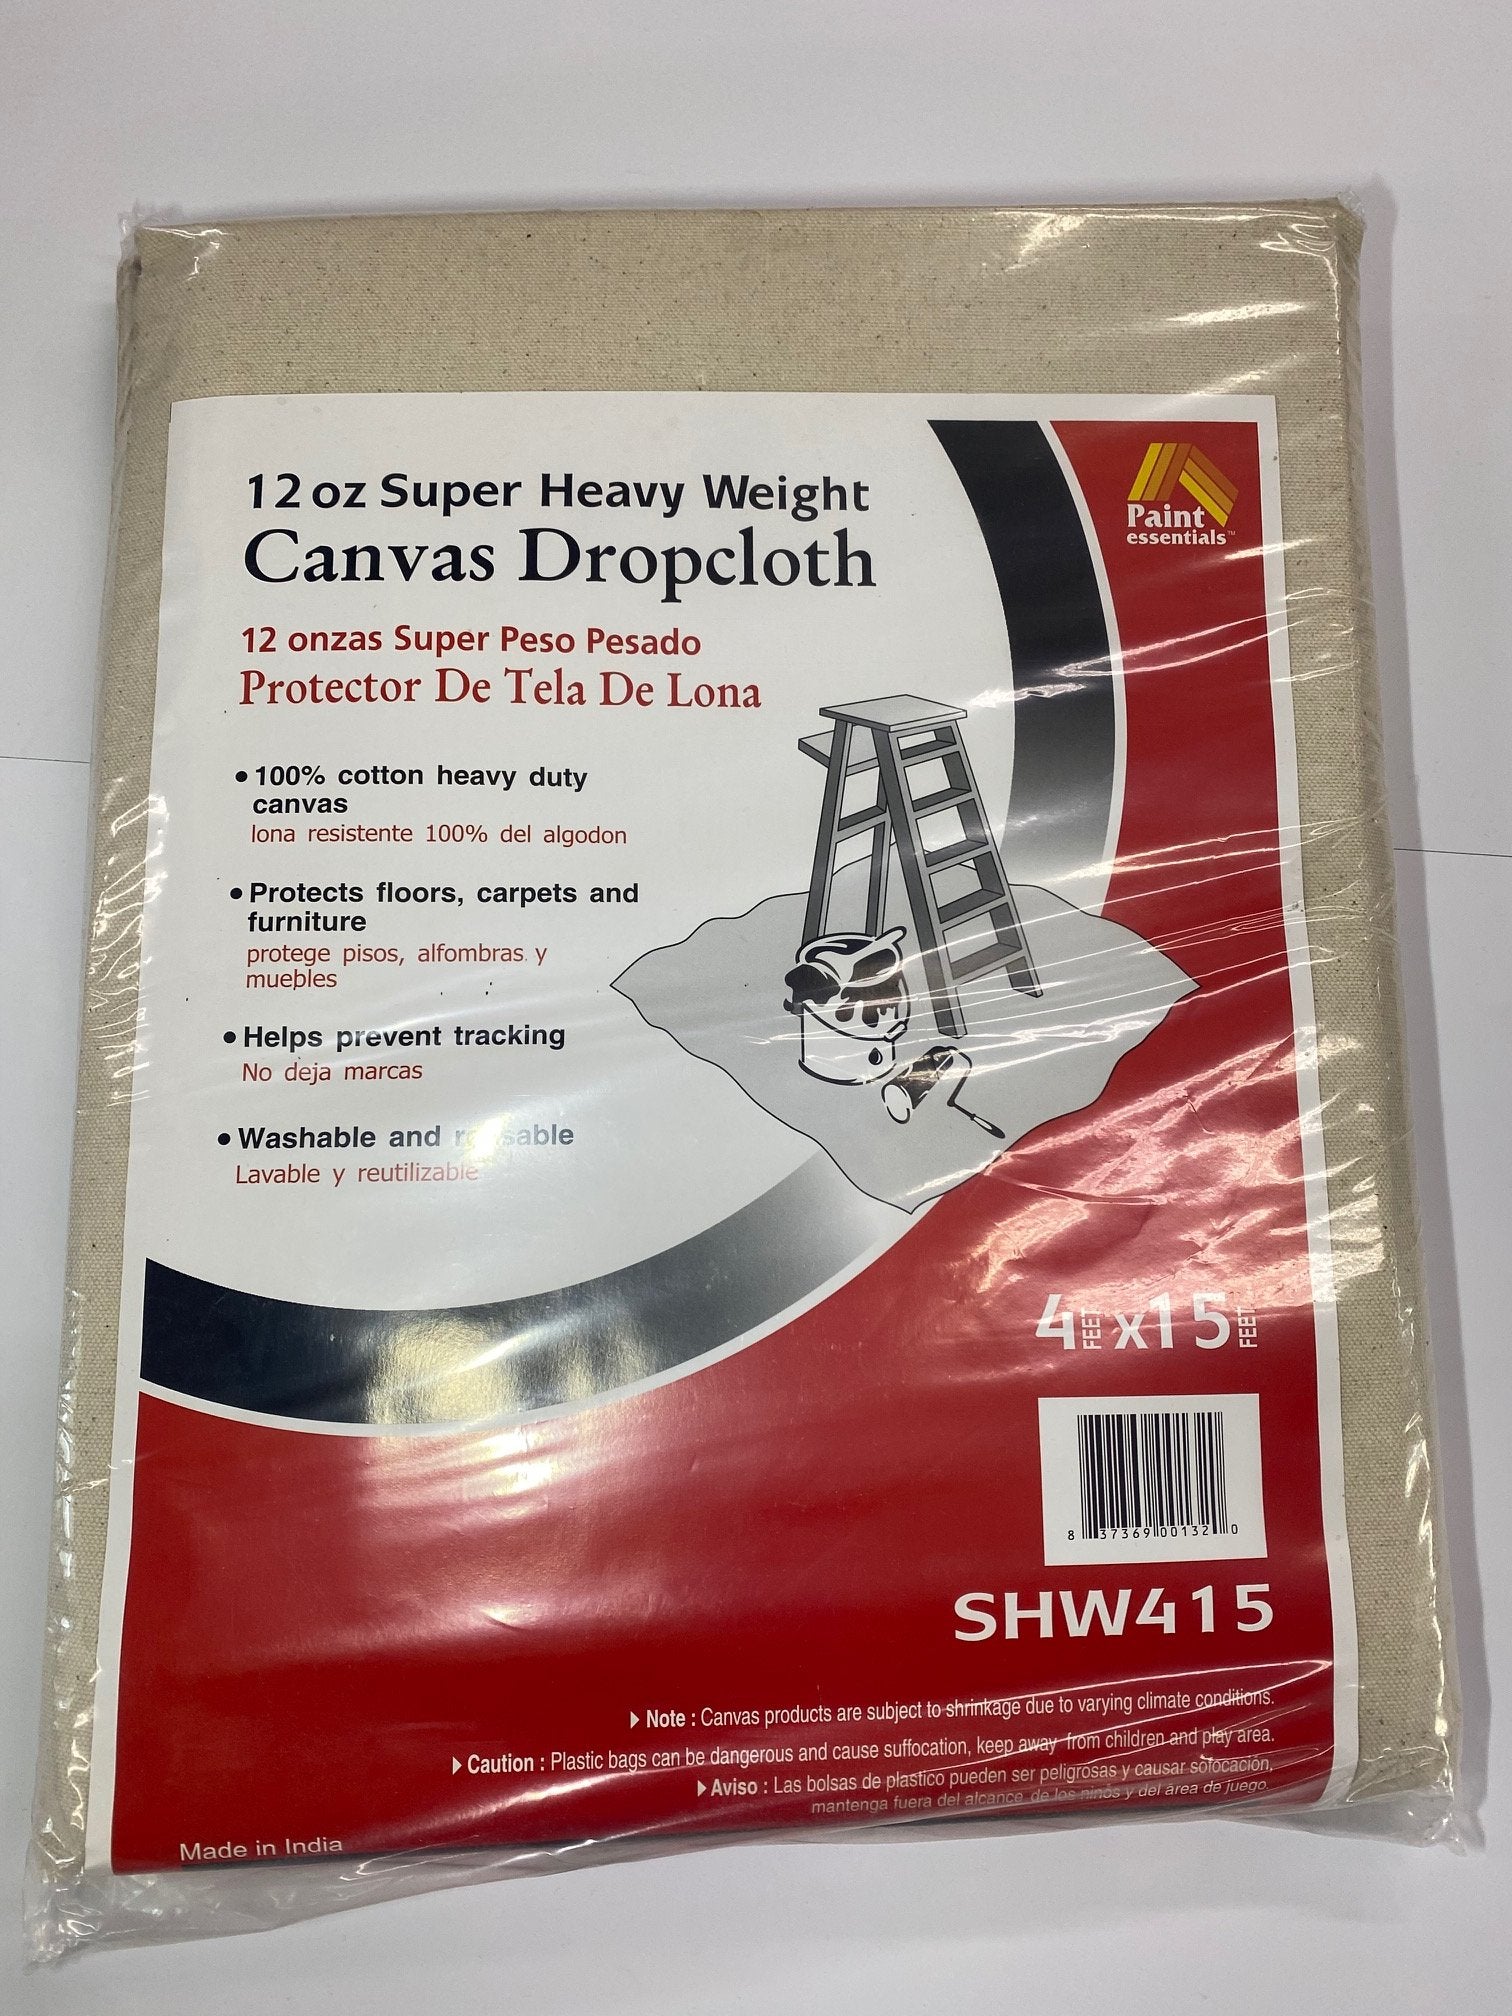 4'x15' Drop Cloth Canvas Heavy Duty 12oz., available at Catalina Paints in CA.